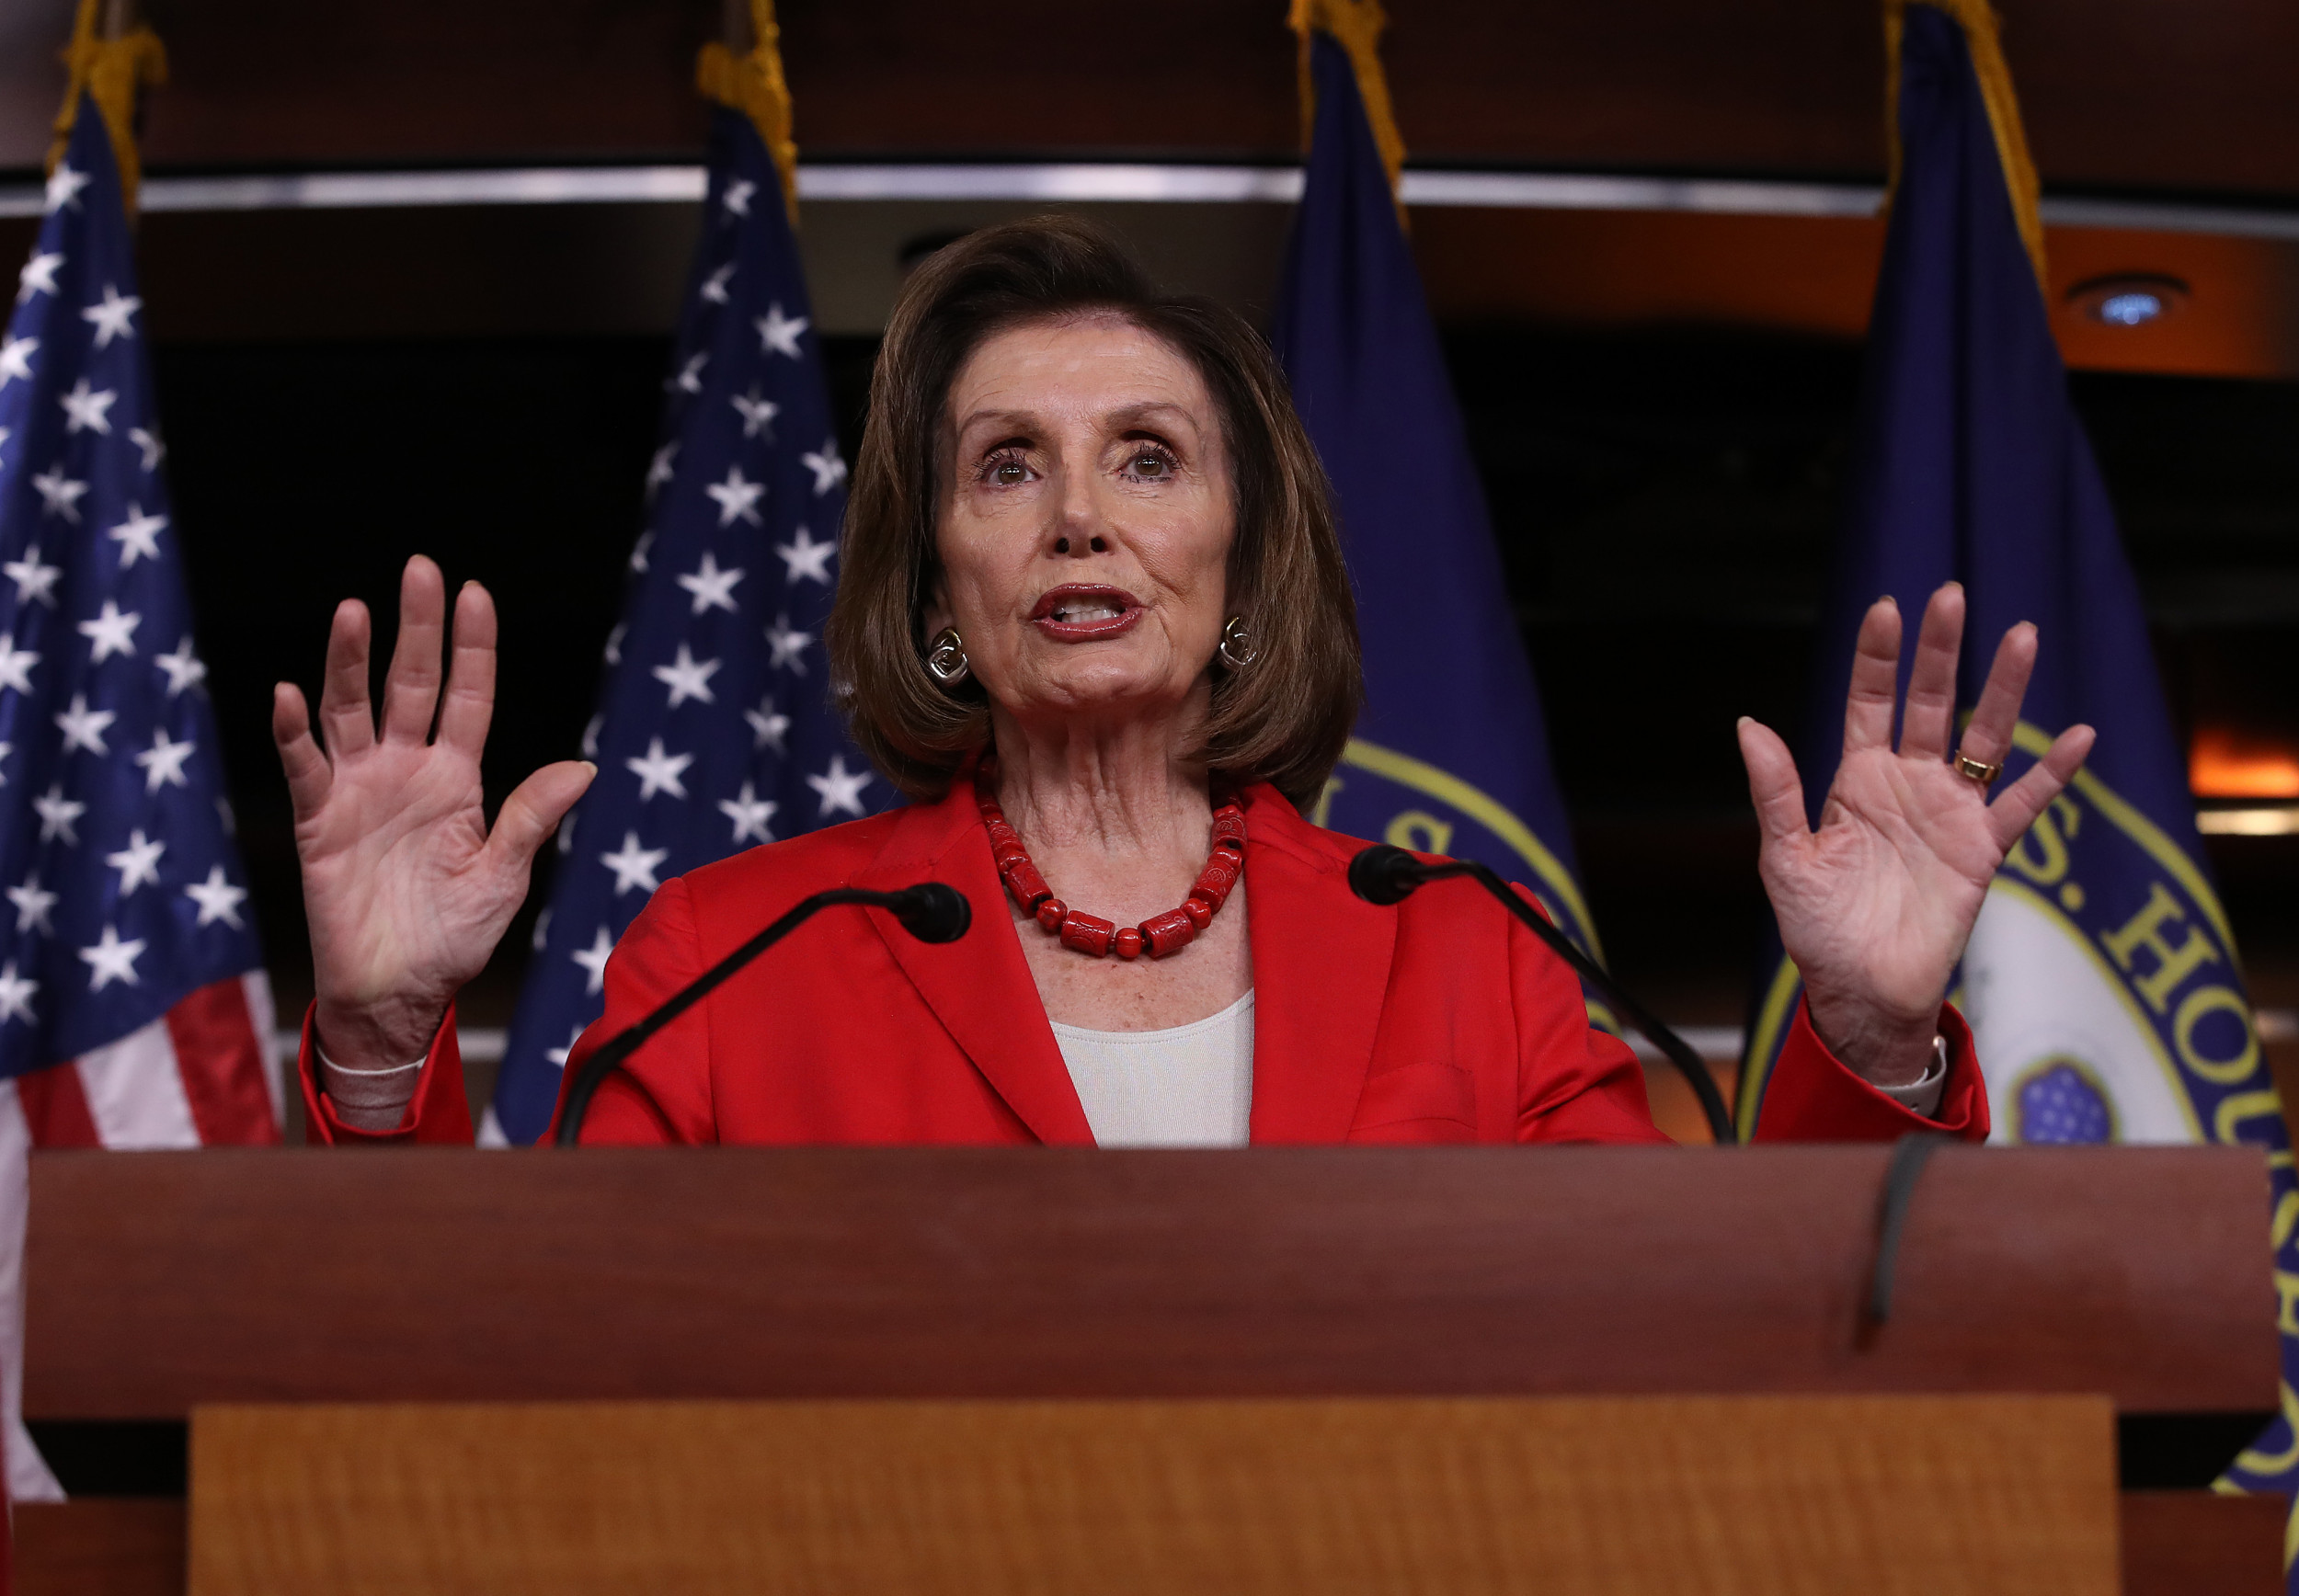 Pelosi doubles down on the squad criticism